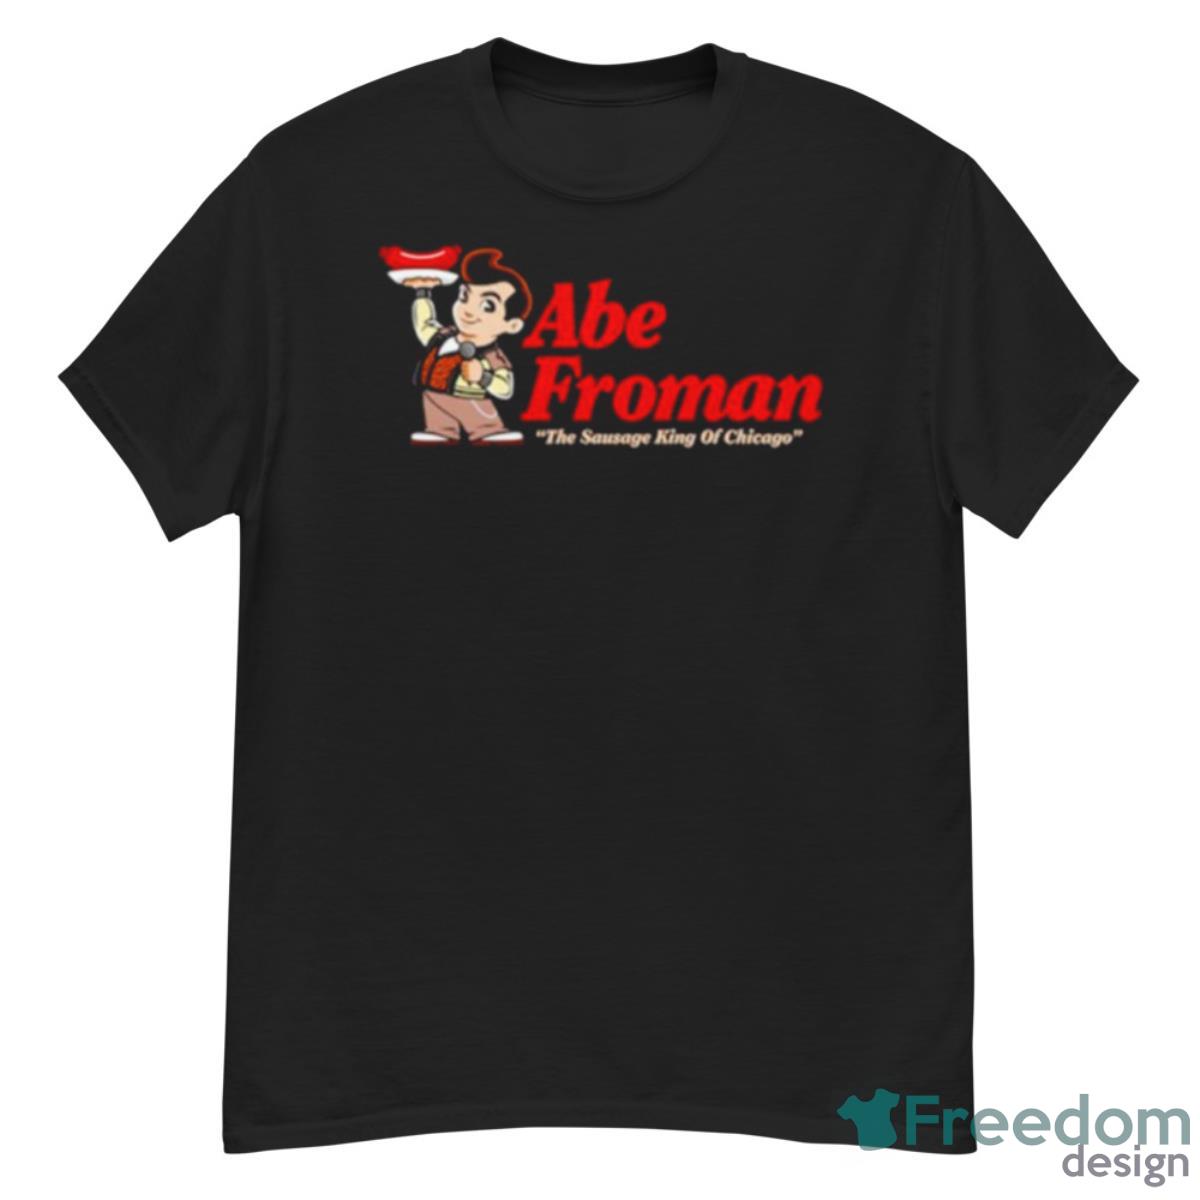 Abe Froman The Sausage King Of Chicago Shirt - G500 Men’s Classic T-Shirt